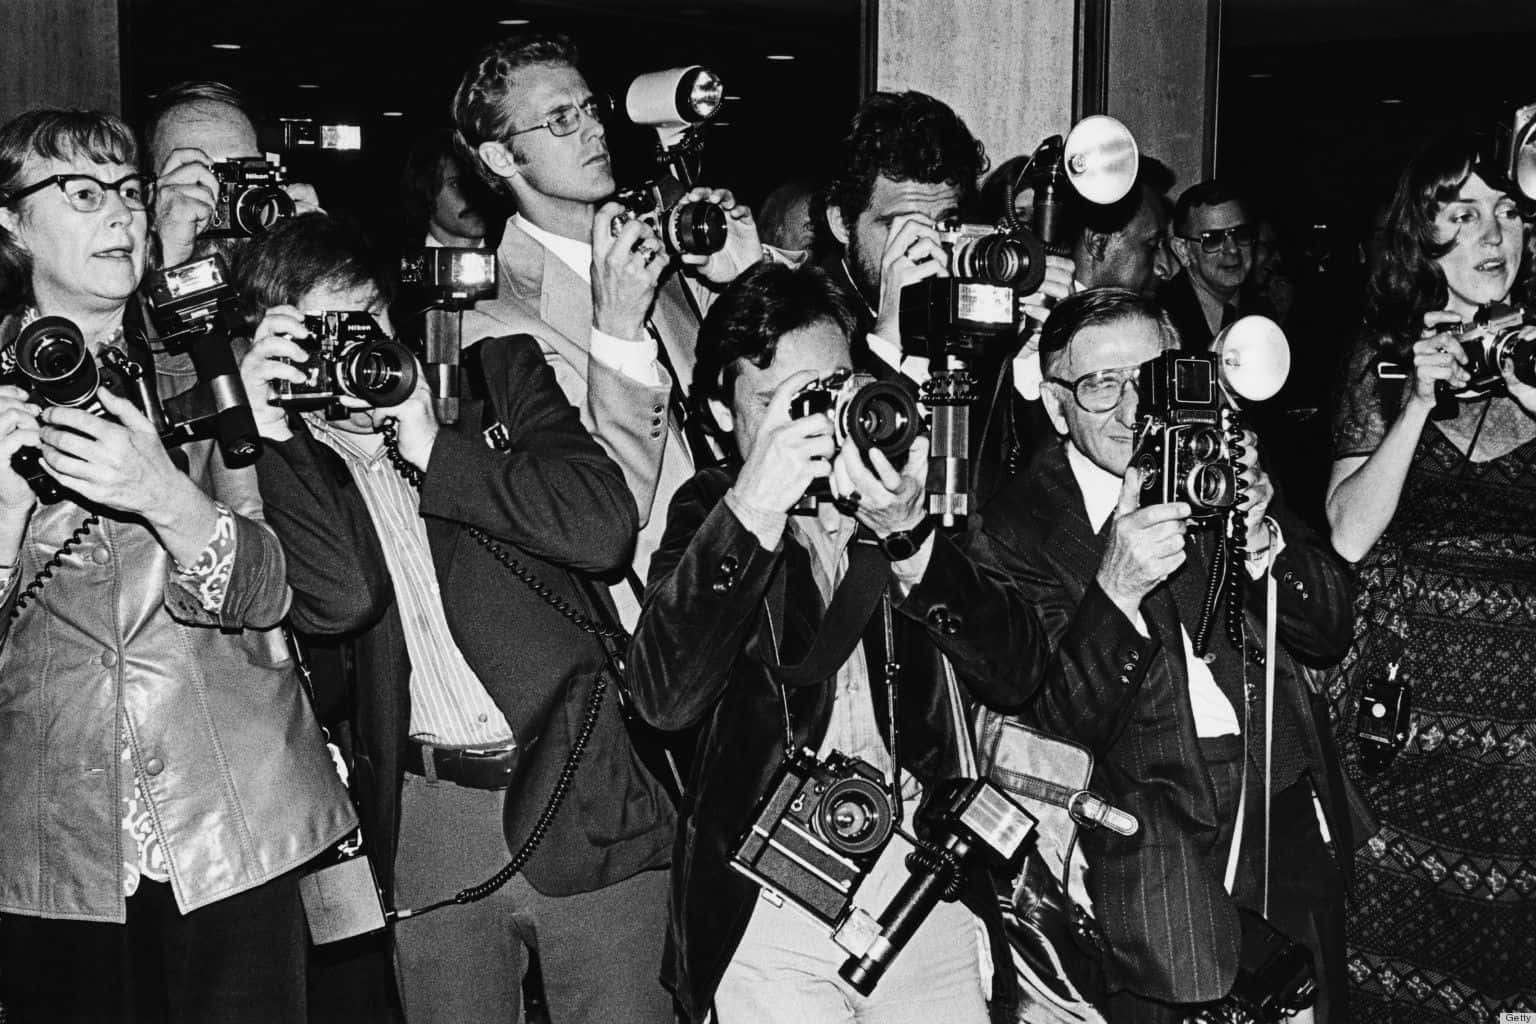 Paparazzi in action with cameras and flashlights at an event